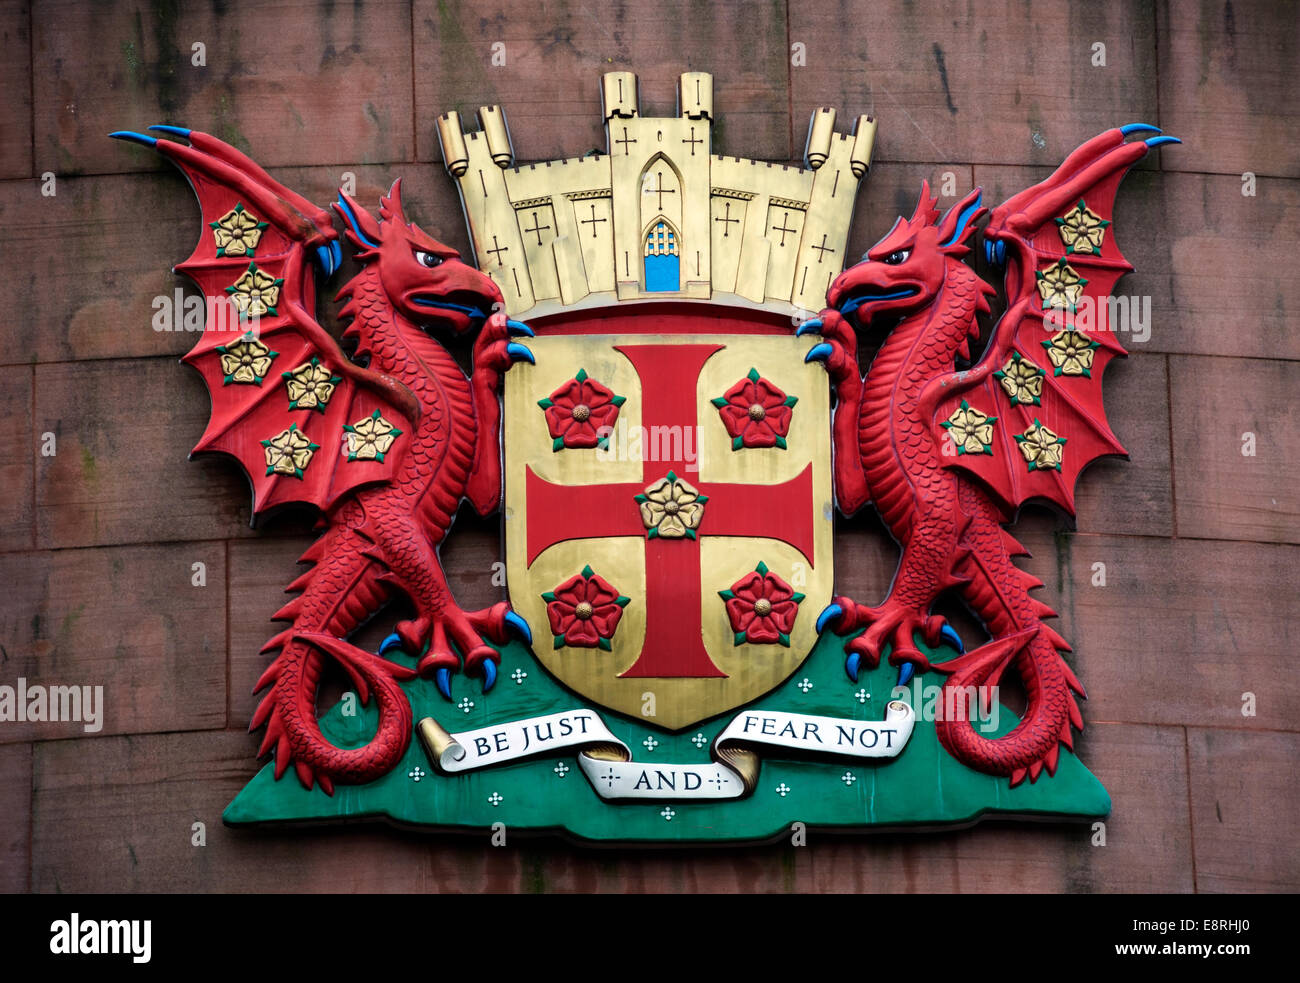 The coat of arms for the city of Carlisle in England is displayed outsie Tullie House Museum on the wall of the rotunda building Stock Photo